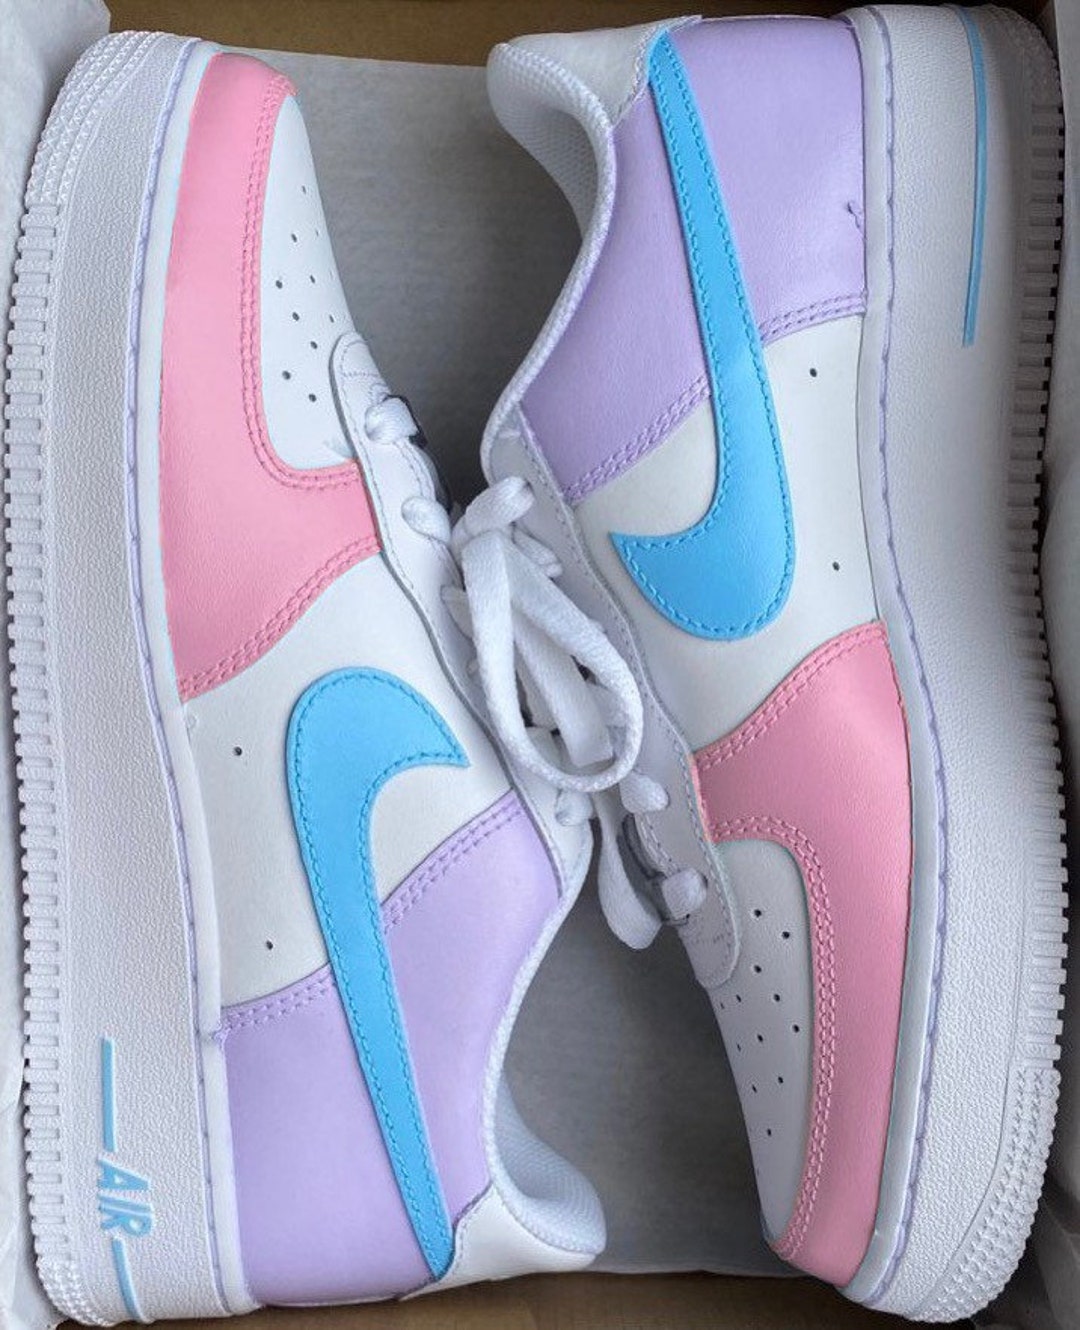 pink and purple forces